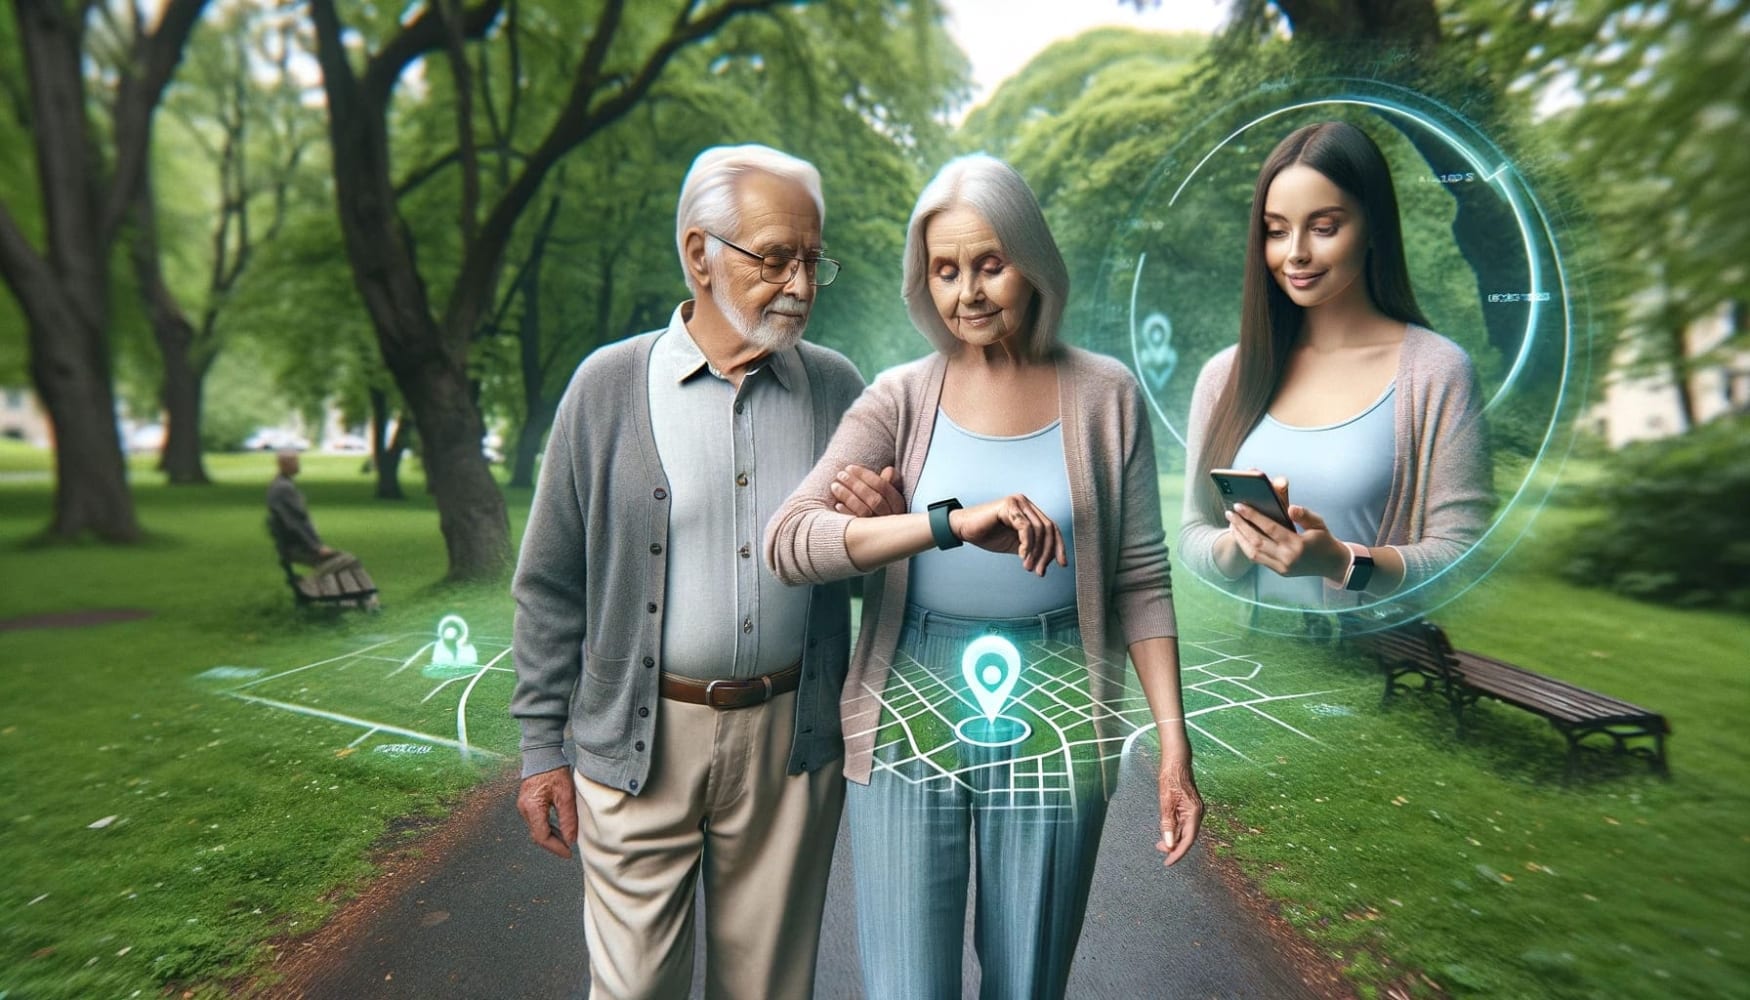 An older man and woman standing next to each other on a parkway looking at their watches, green trees all around, and a few geolocation grids, with a girl on the right in a circle looking at her phone